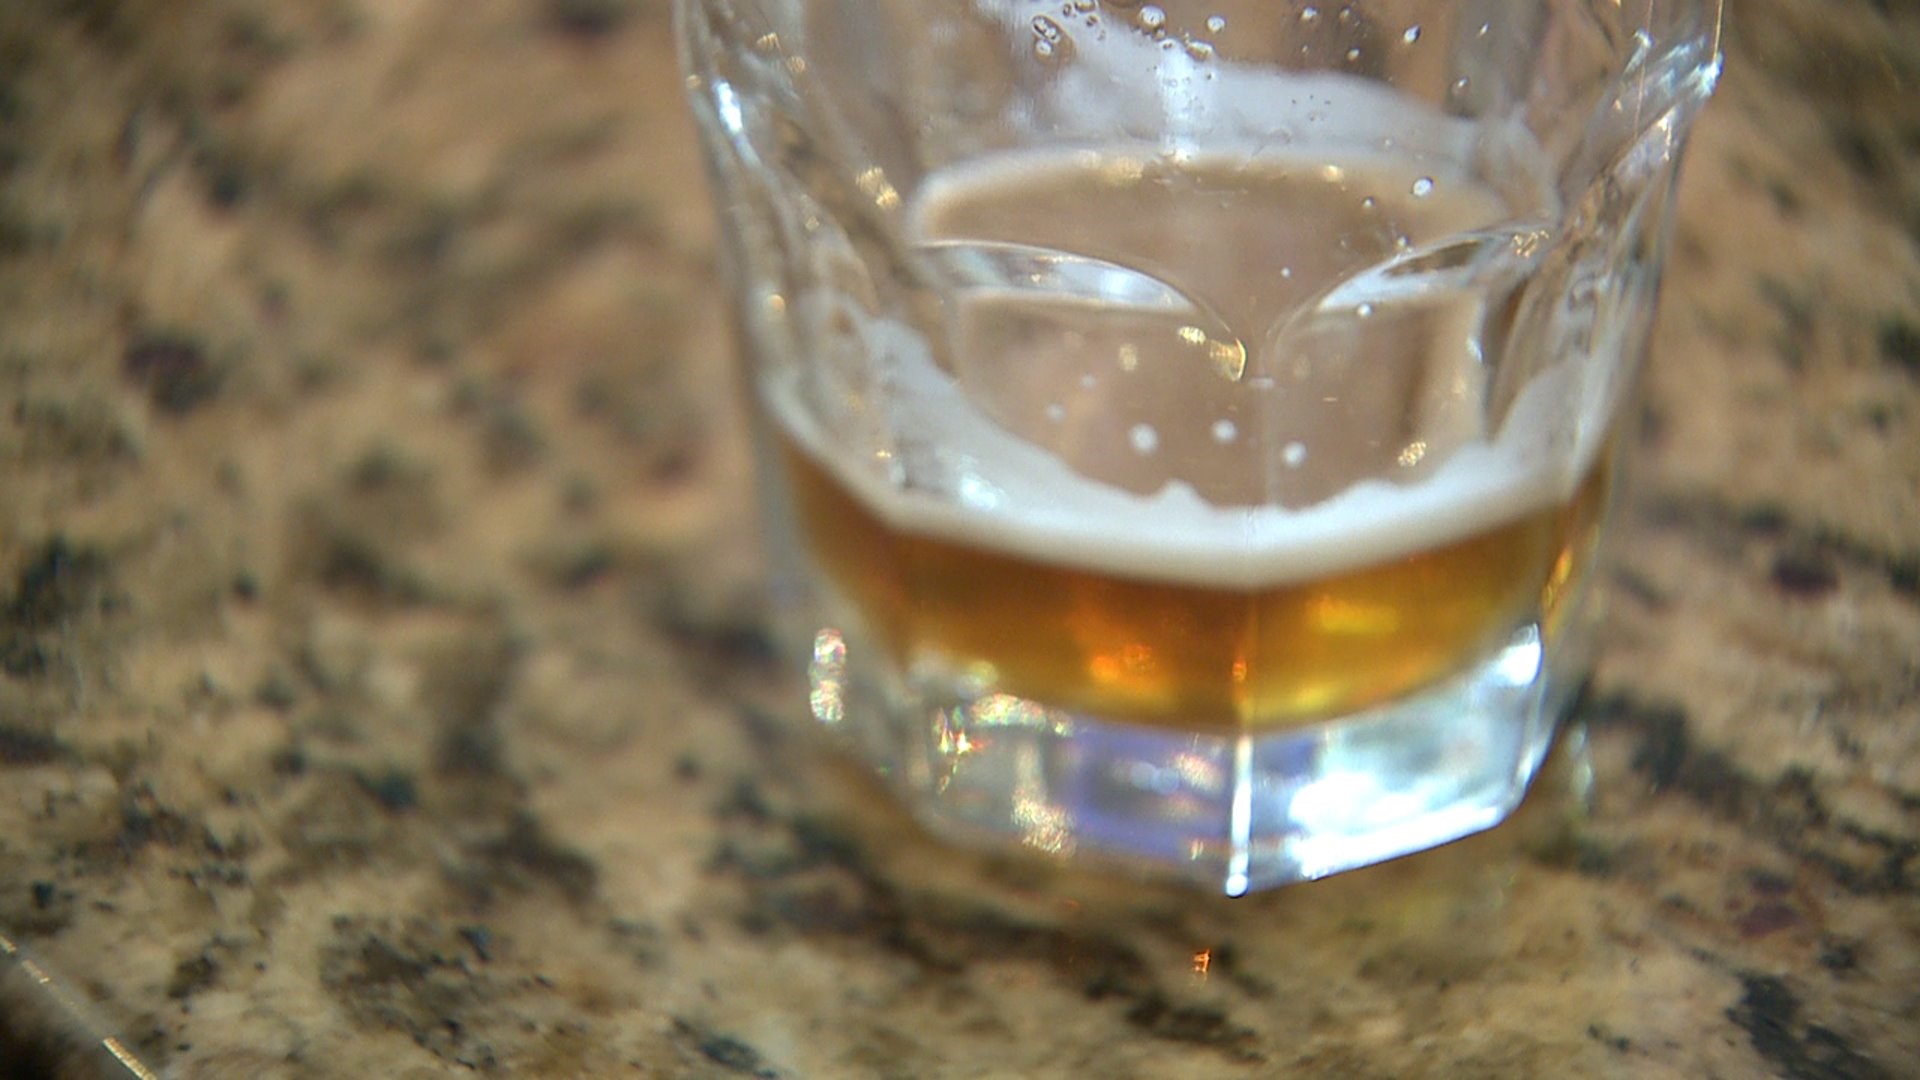 Proposed change in Moline could allow servers 18 and over to serve alcohol